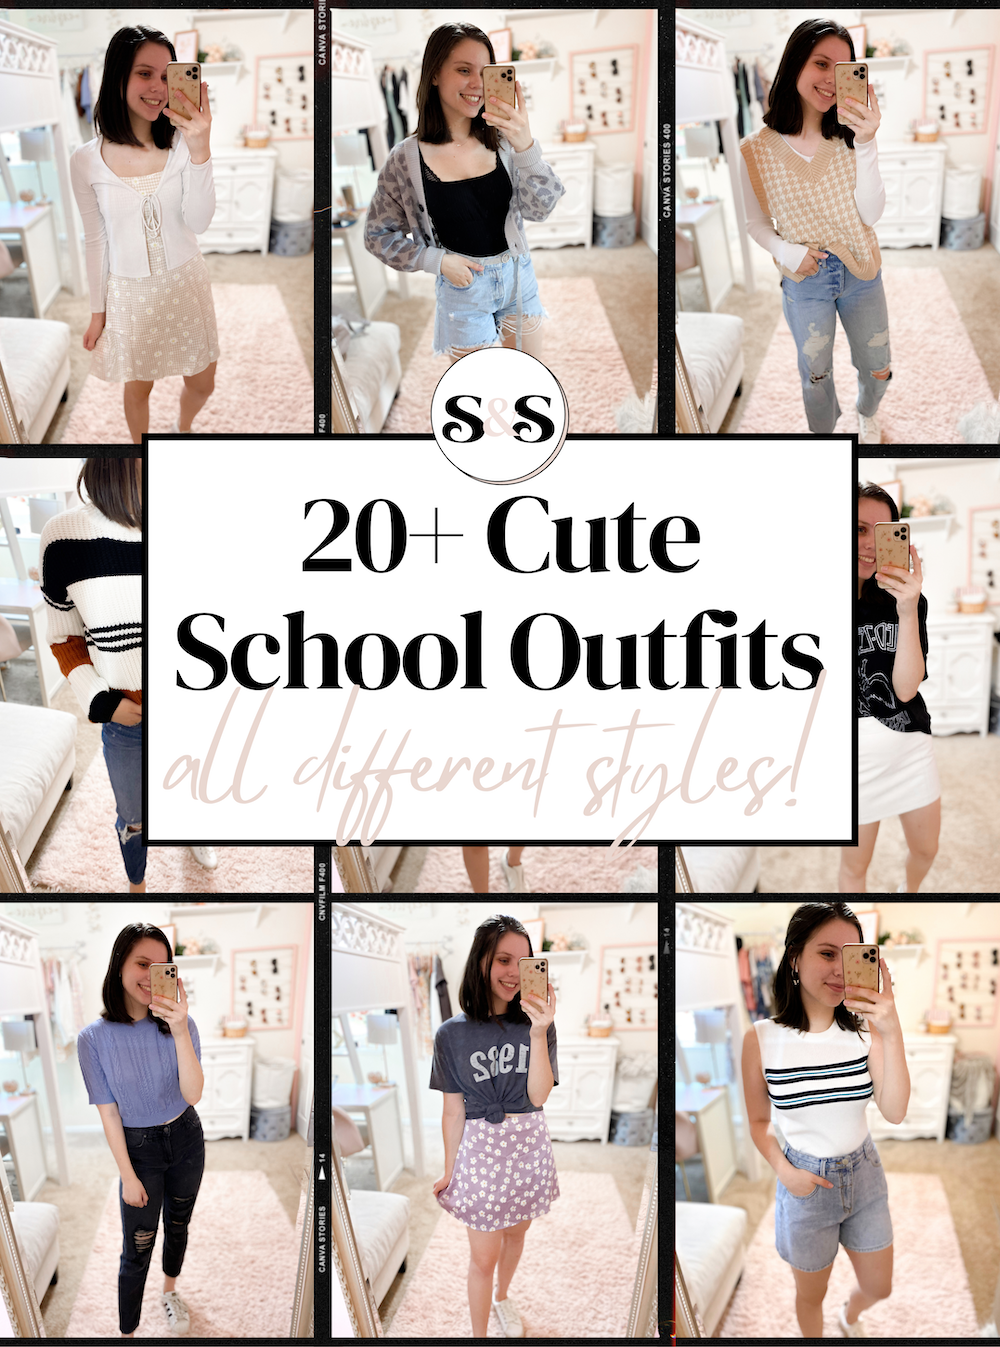 20+ Cute School Outfit Ideas (All Different Styles!)